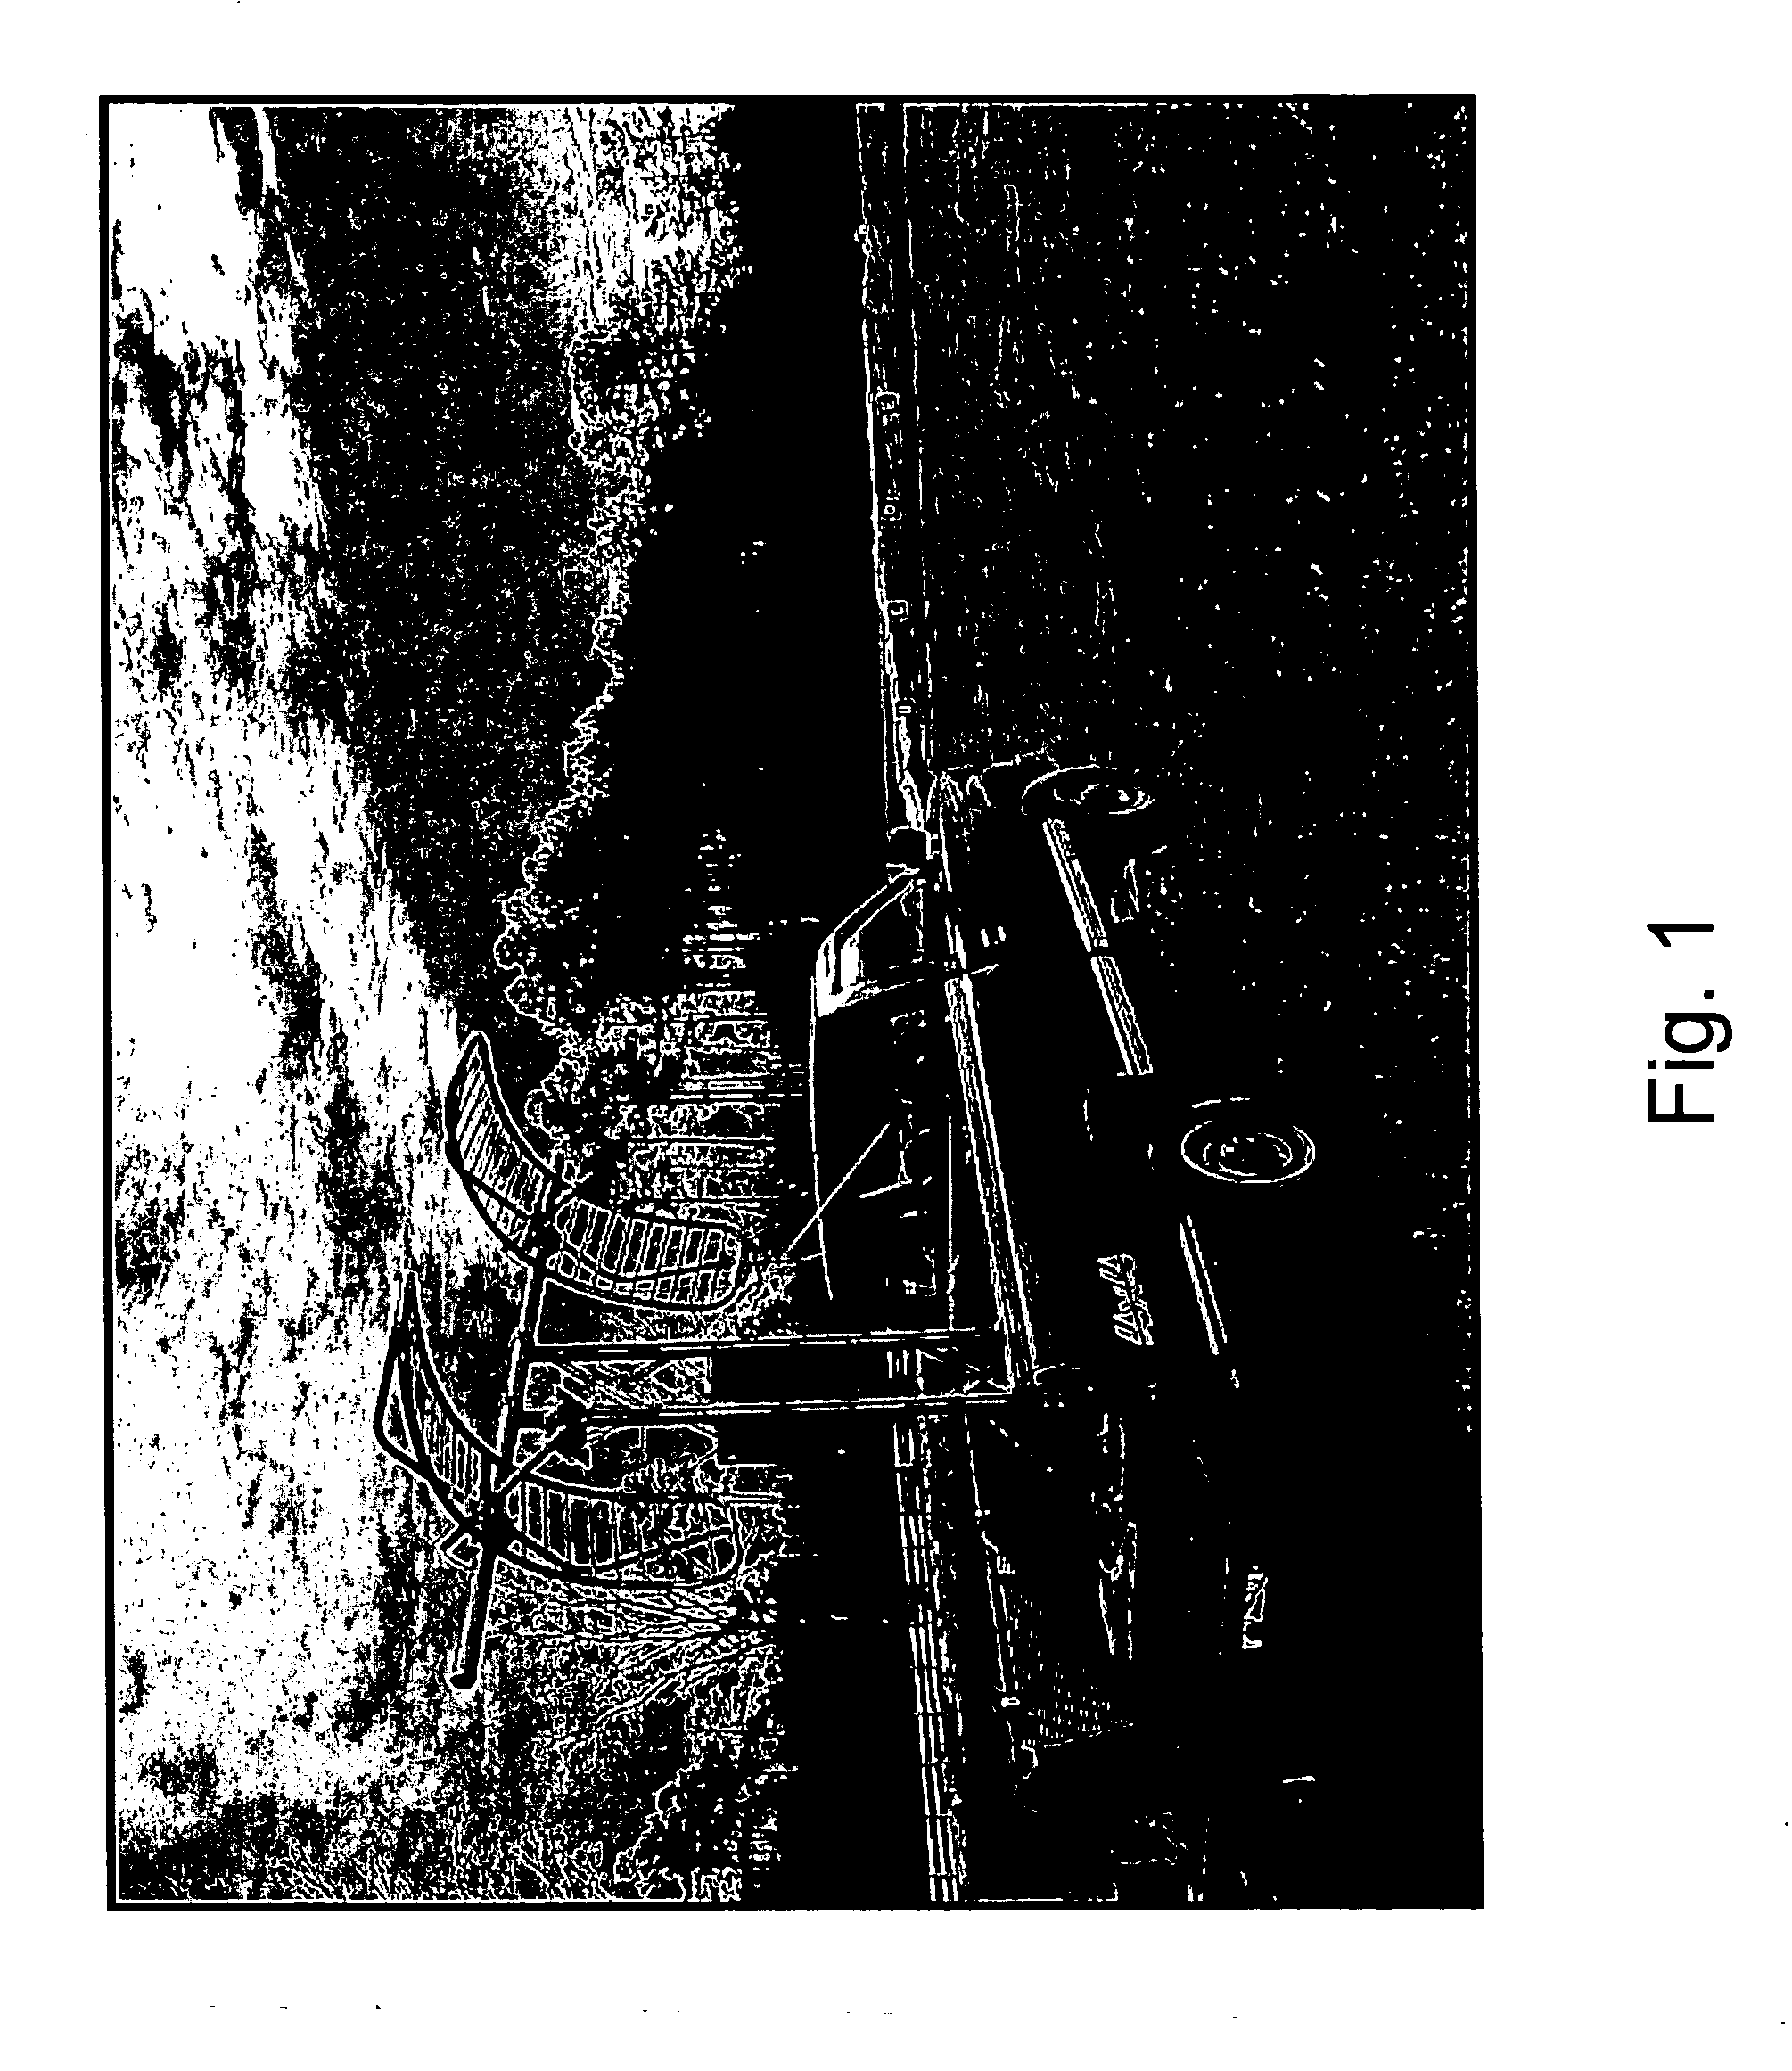 Vehicle-mounted ultra-wideband radar systems and methods